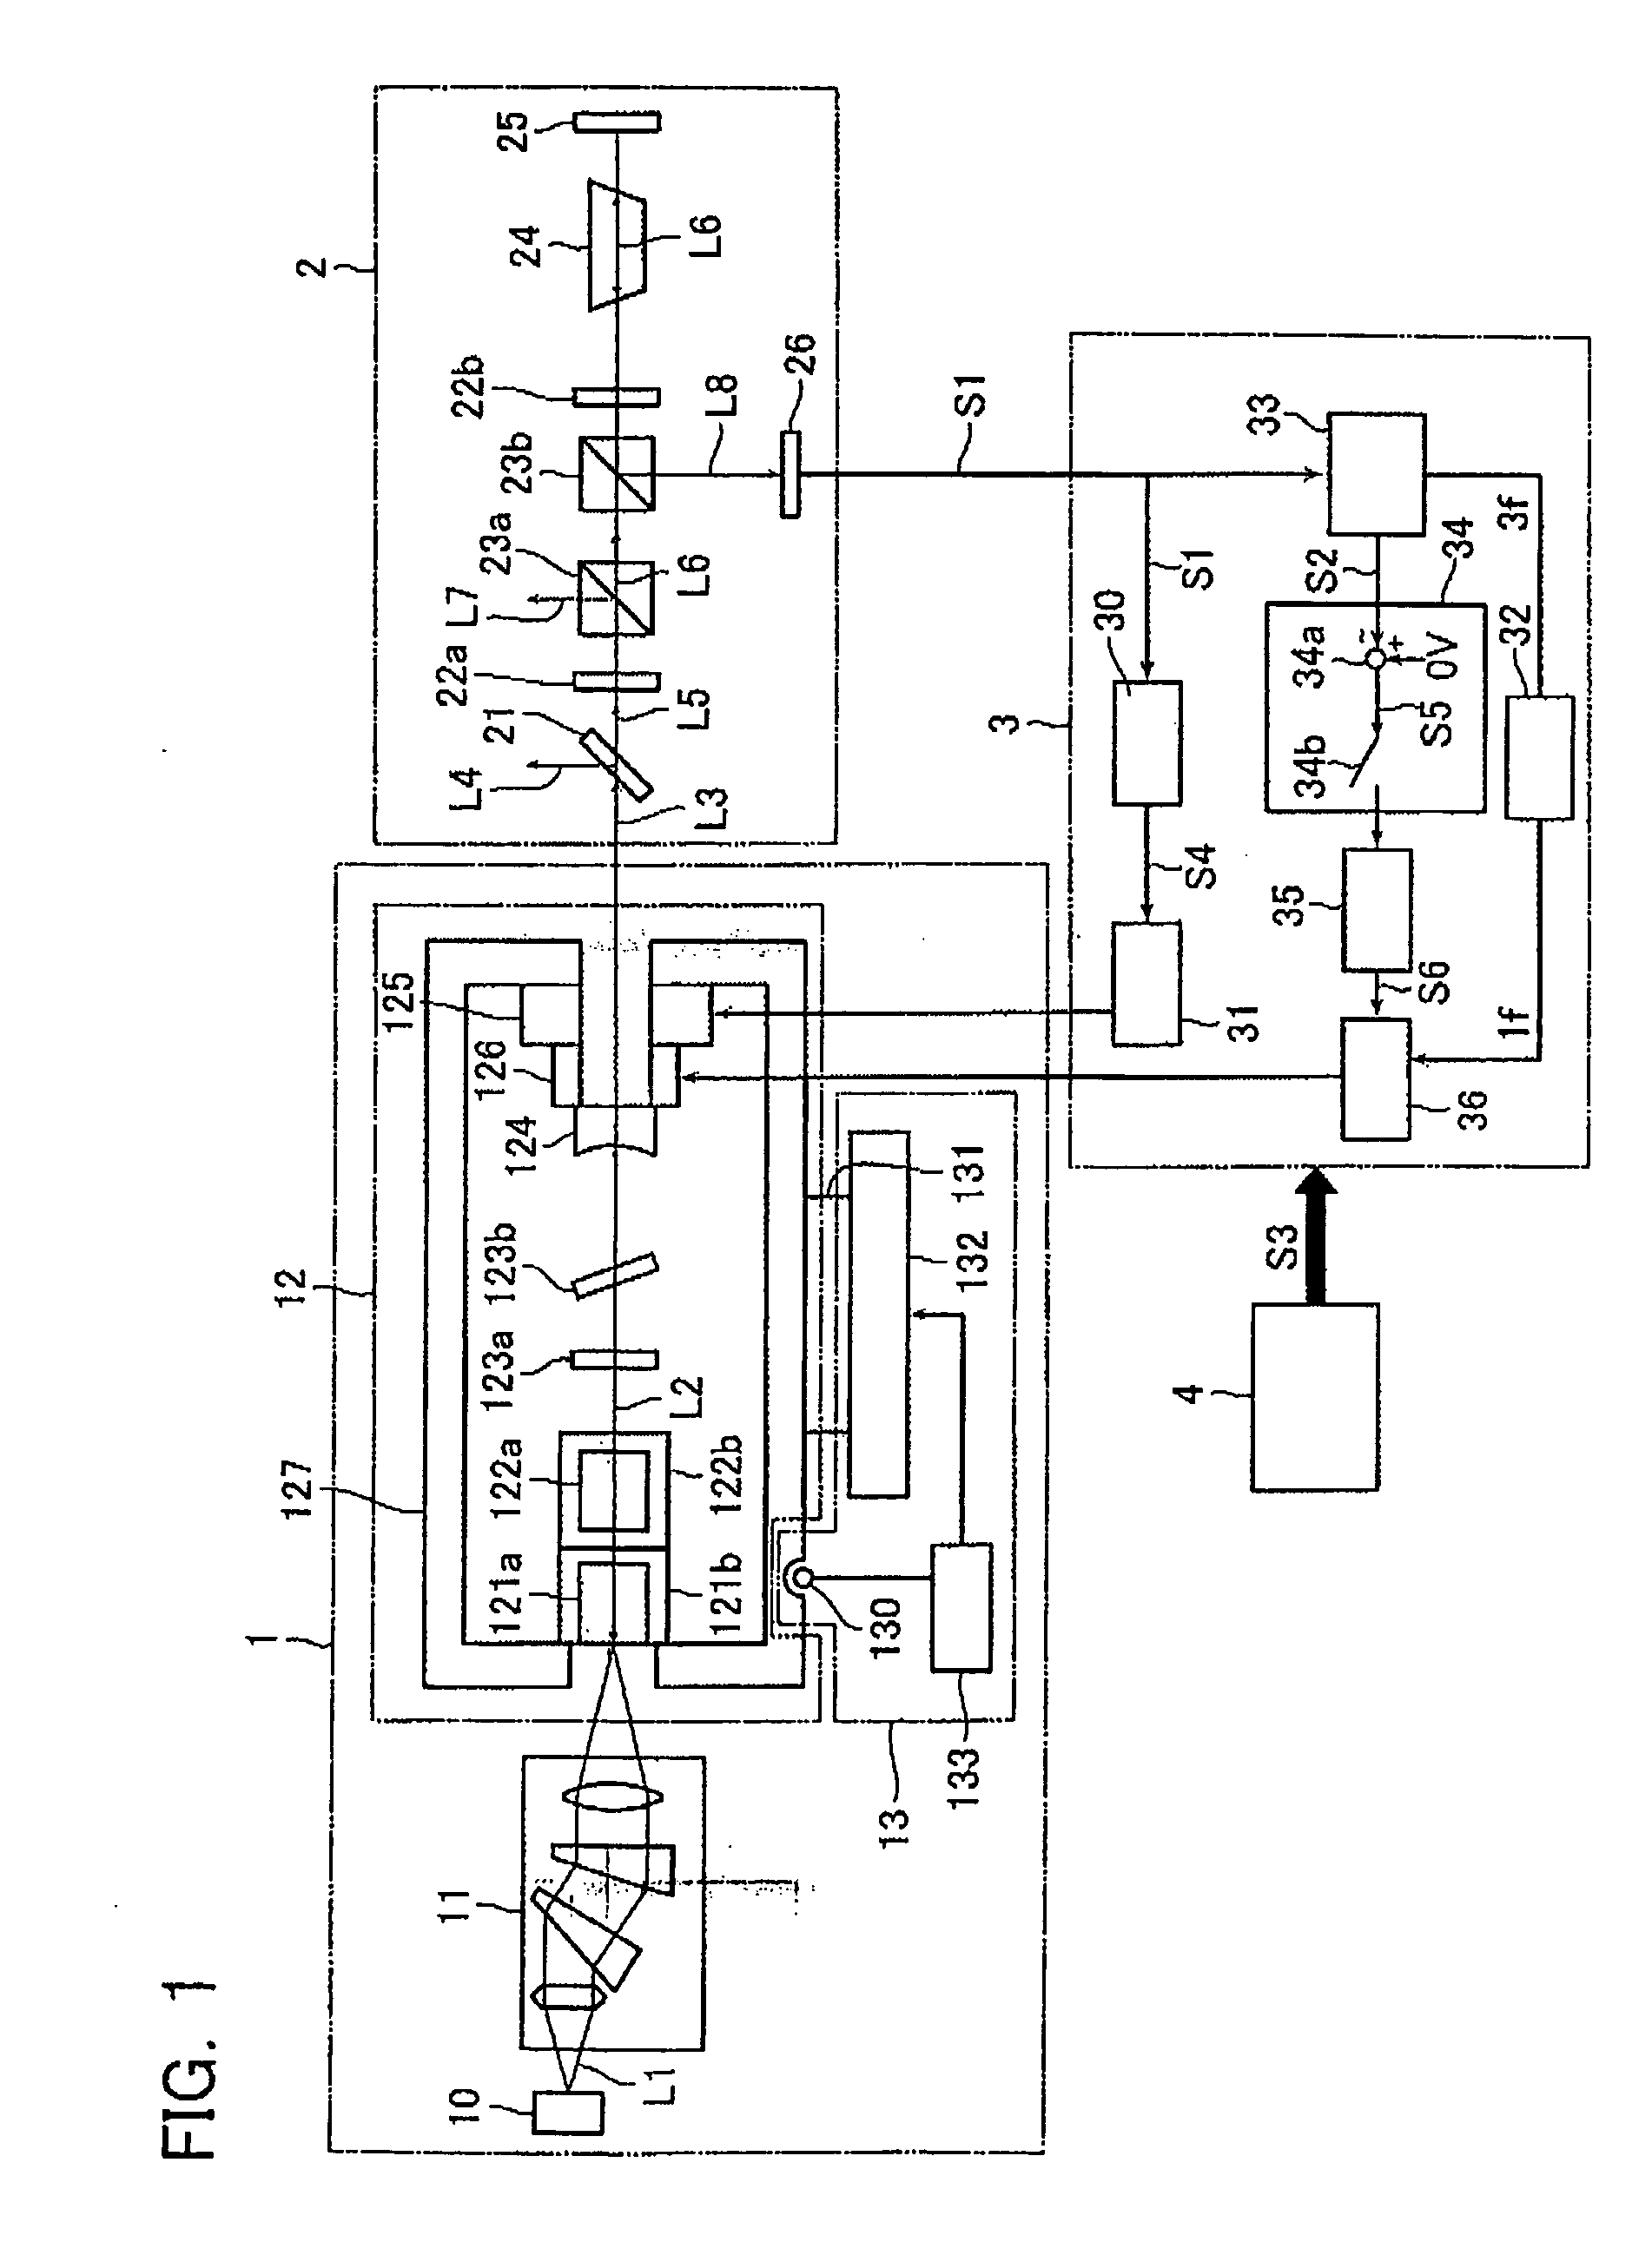 Frequency-stabilized laser and frequency stabilizing method